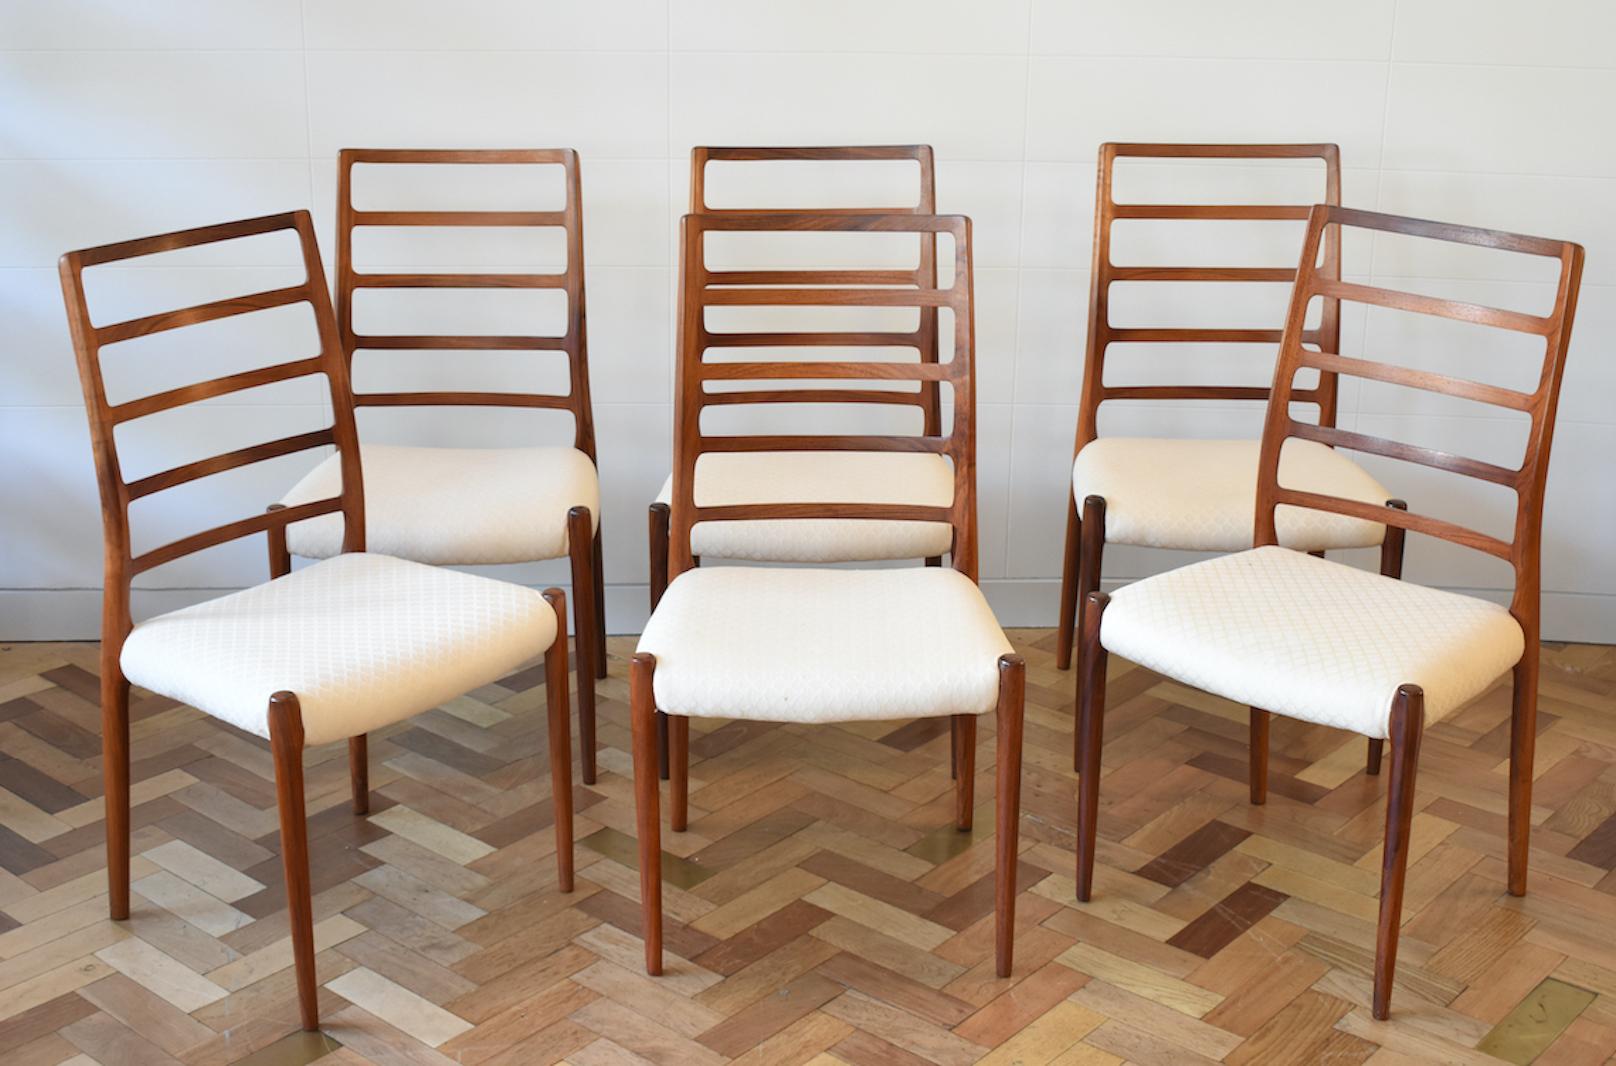 Gorgeous set of six Model 82 rosewood dining chairs designed by Niels O. Møller for J.L. Møllers Møbelfabrik in Denmark, circa 1970s. These rosewood chairs feature the distinctive curved ladder back and tapered legs, offering both comfort and